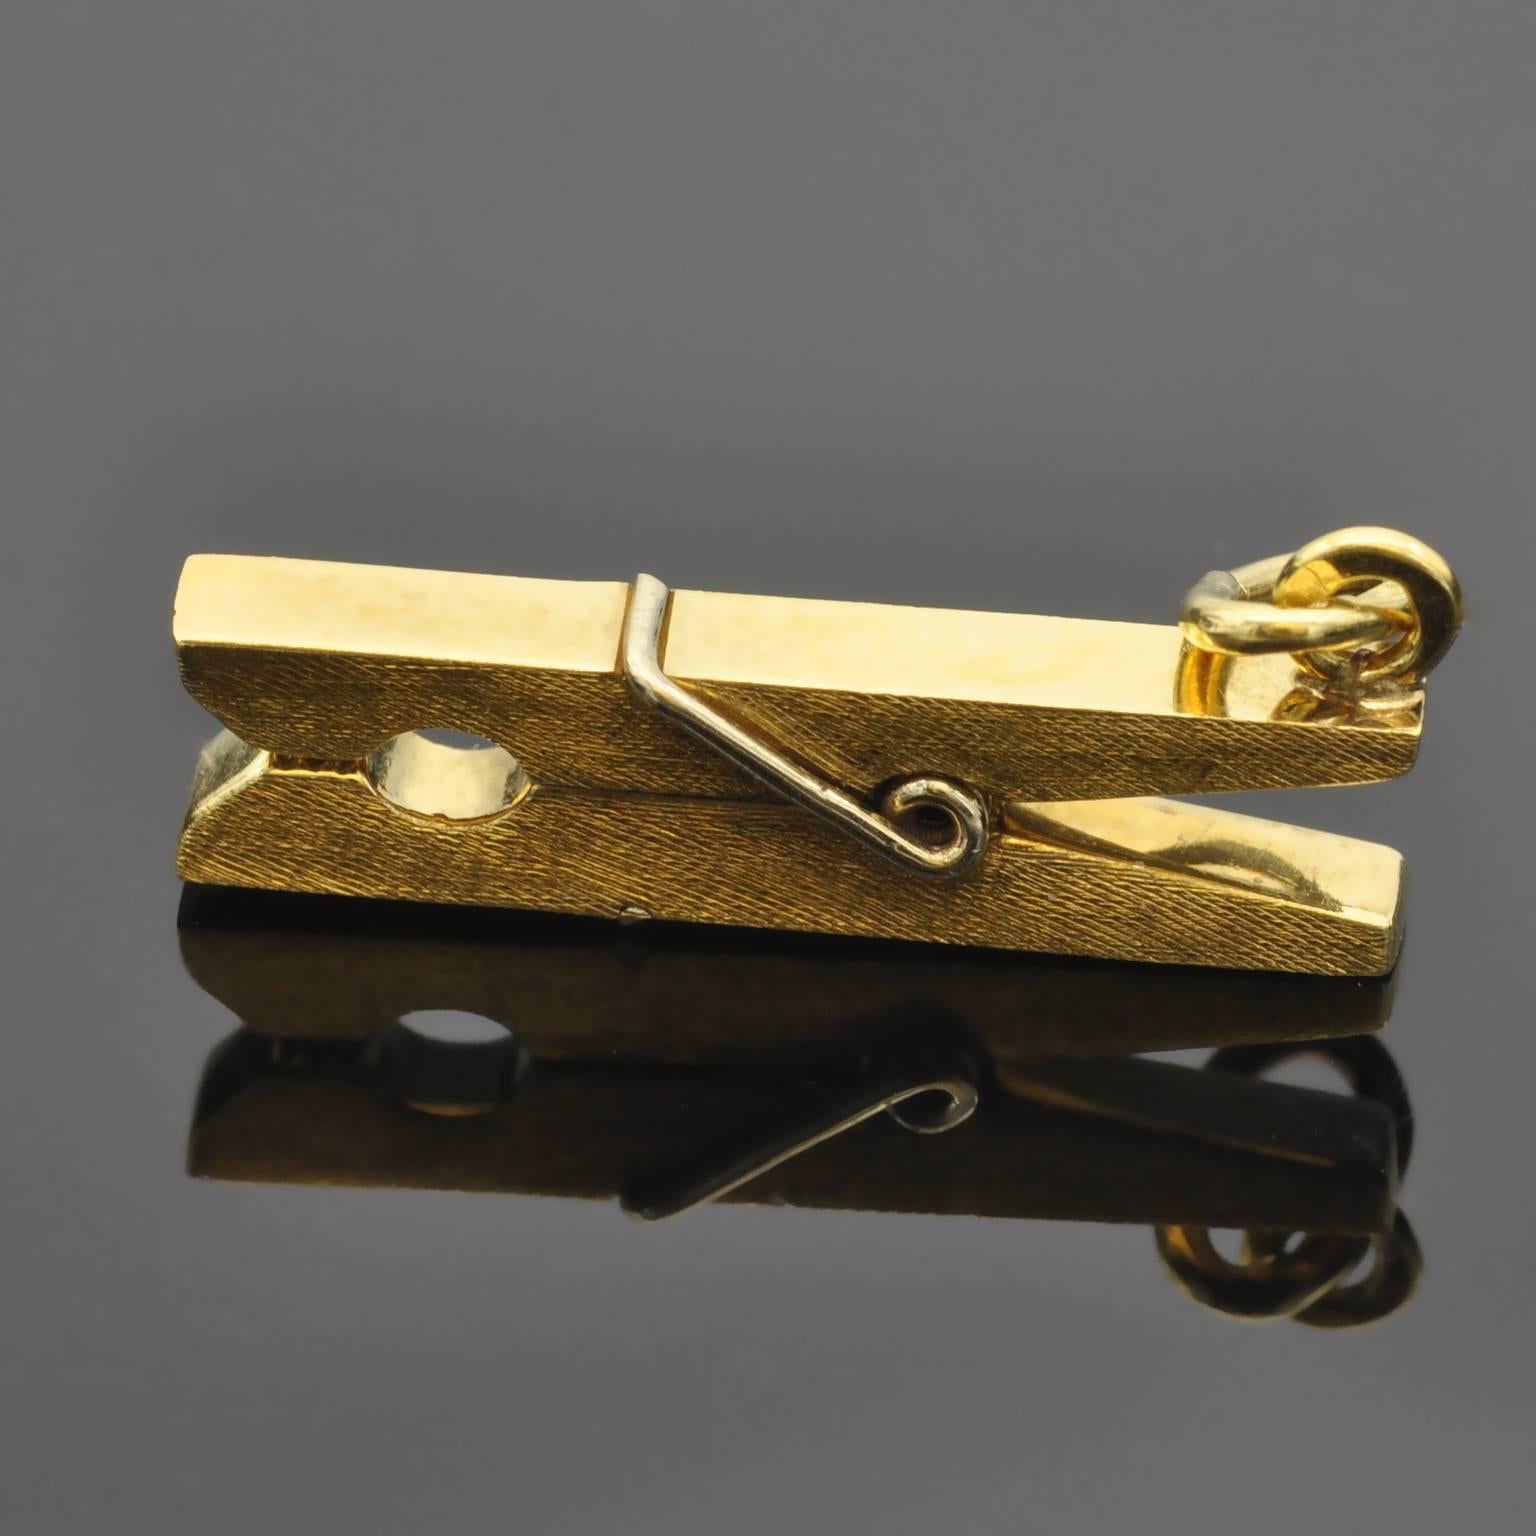 Extremely well made charm representing a clothespin in 18 kt plain yellow Gold.
The peg actually work ! 
